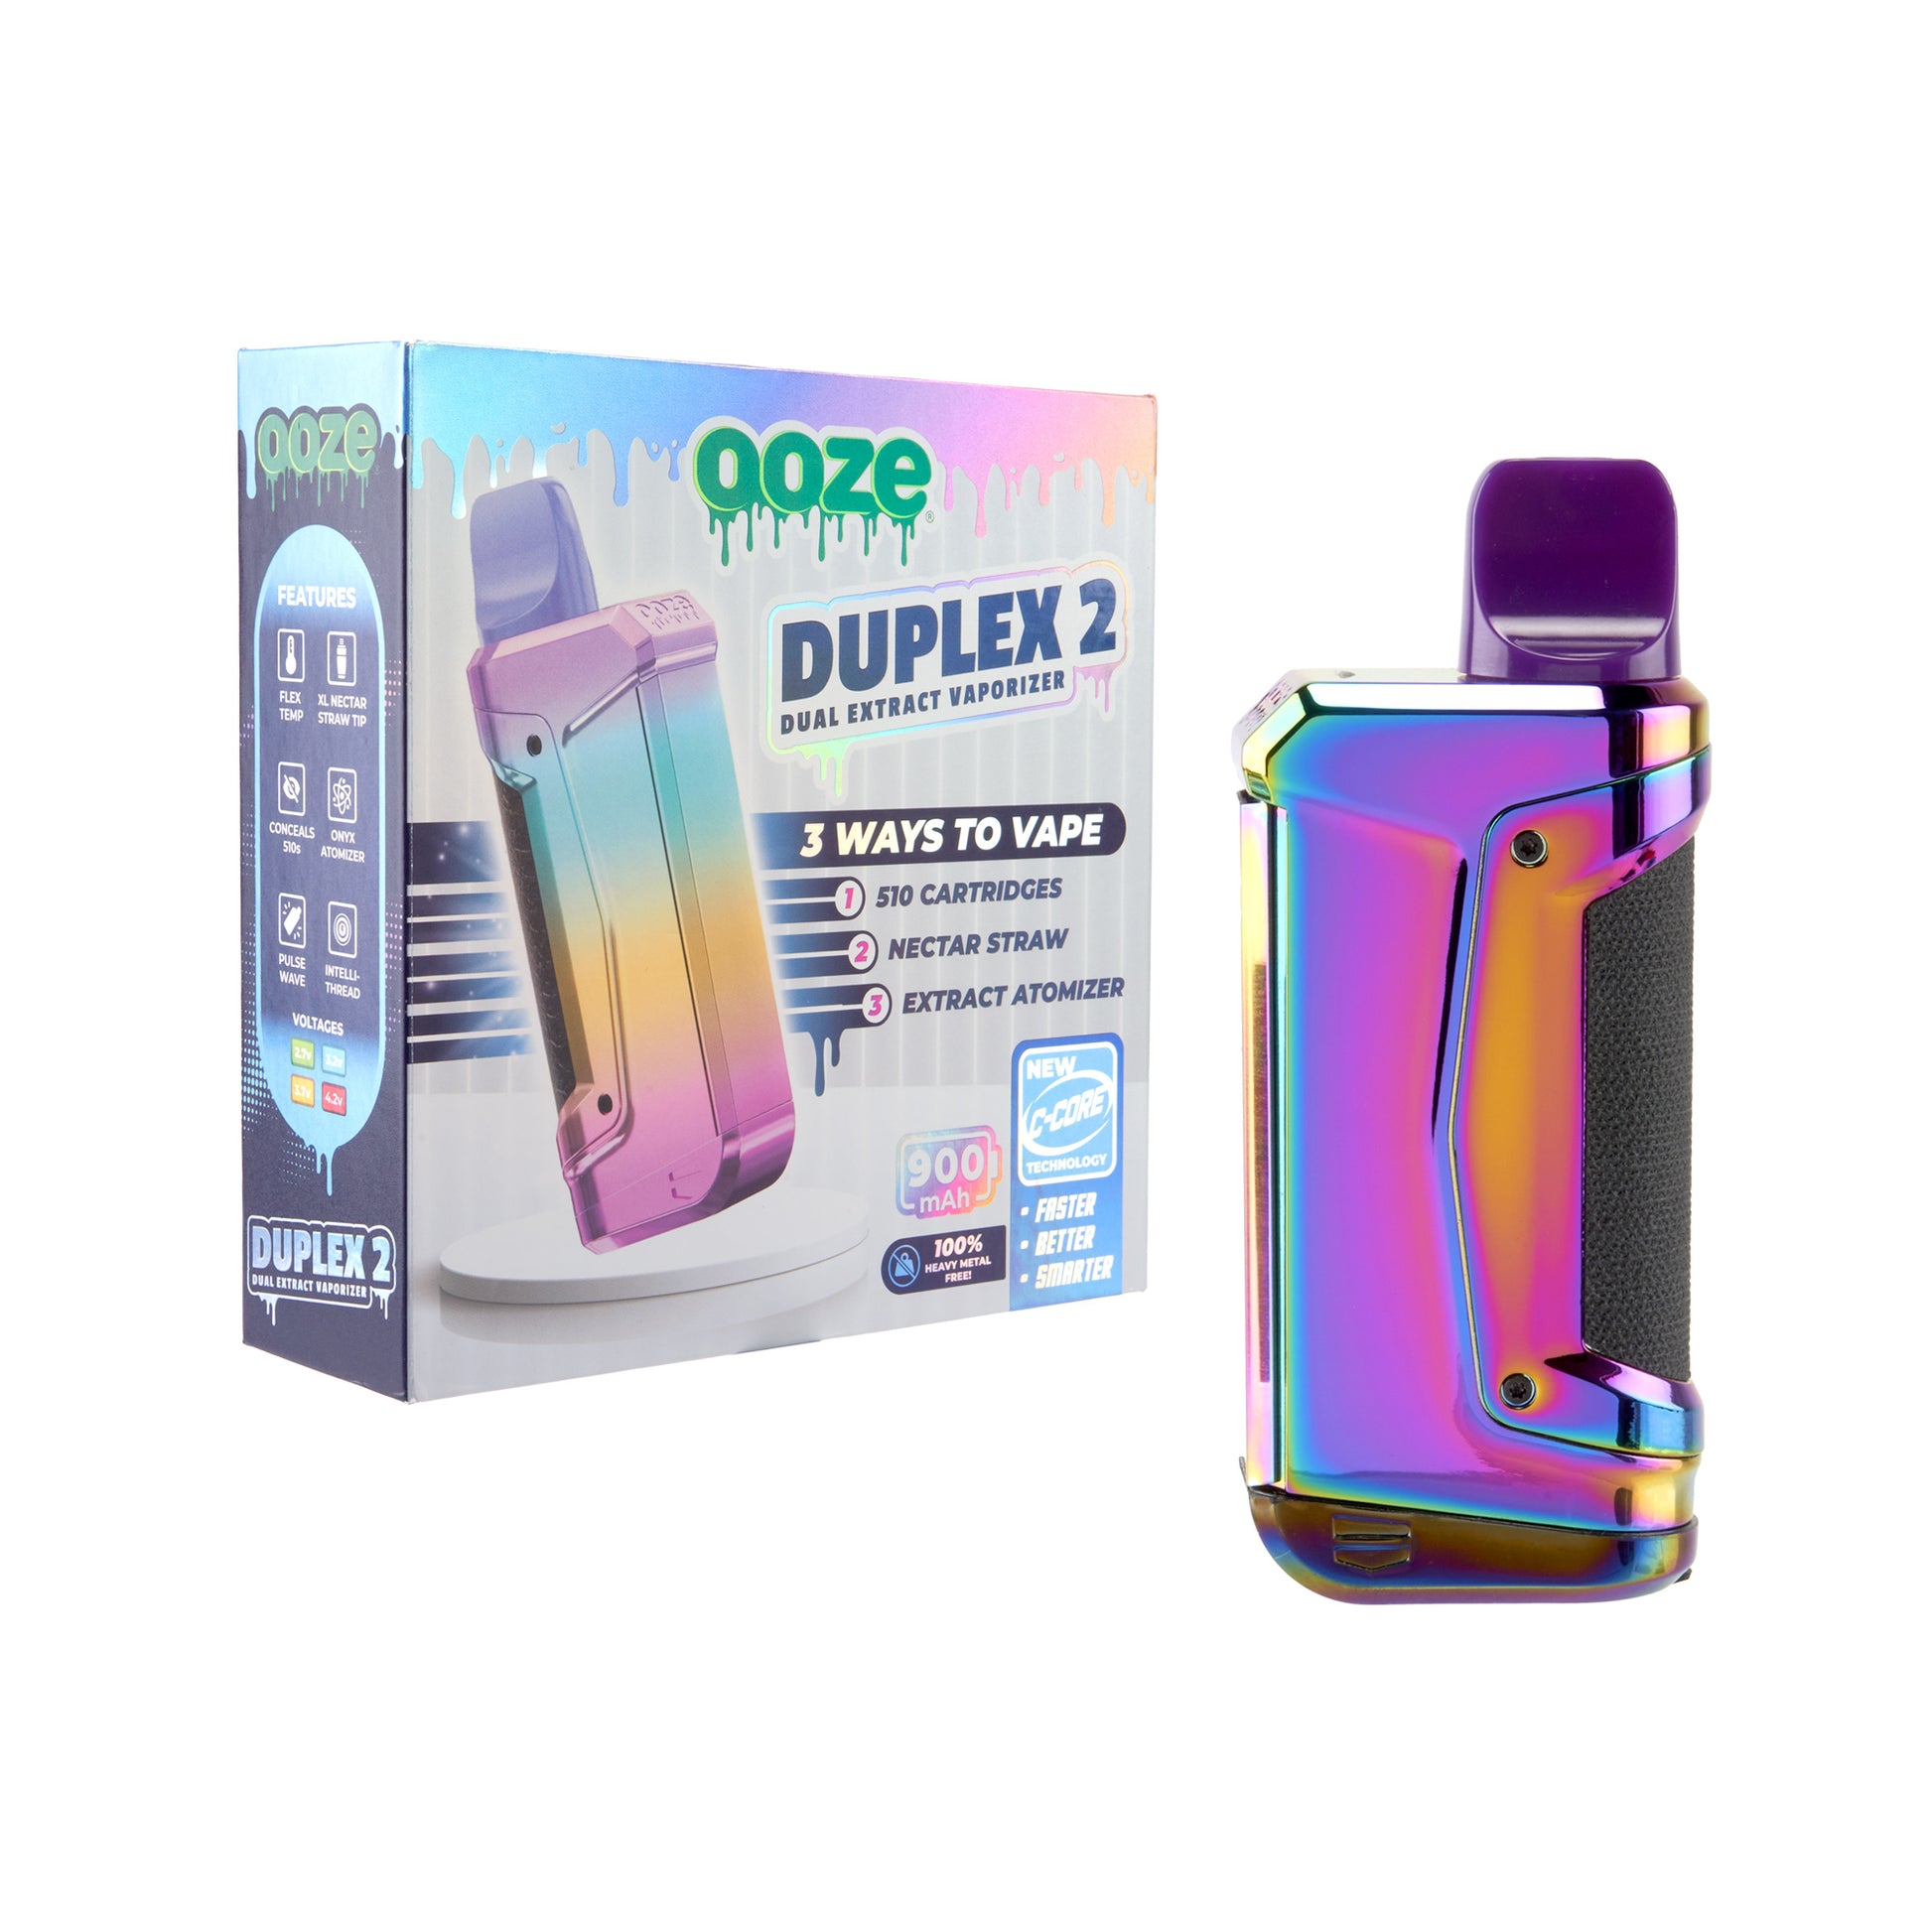 The rainbow Ooze Duplex 2 extract vape is shown next to the box